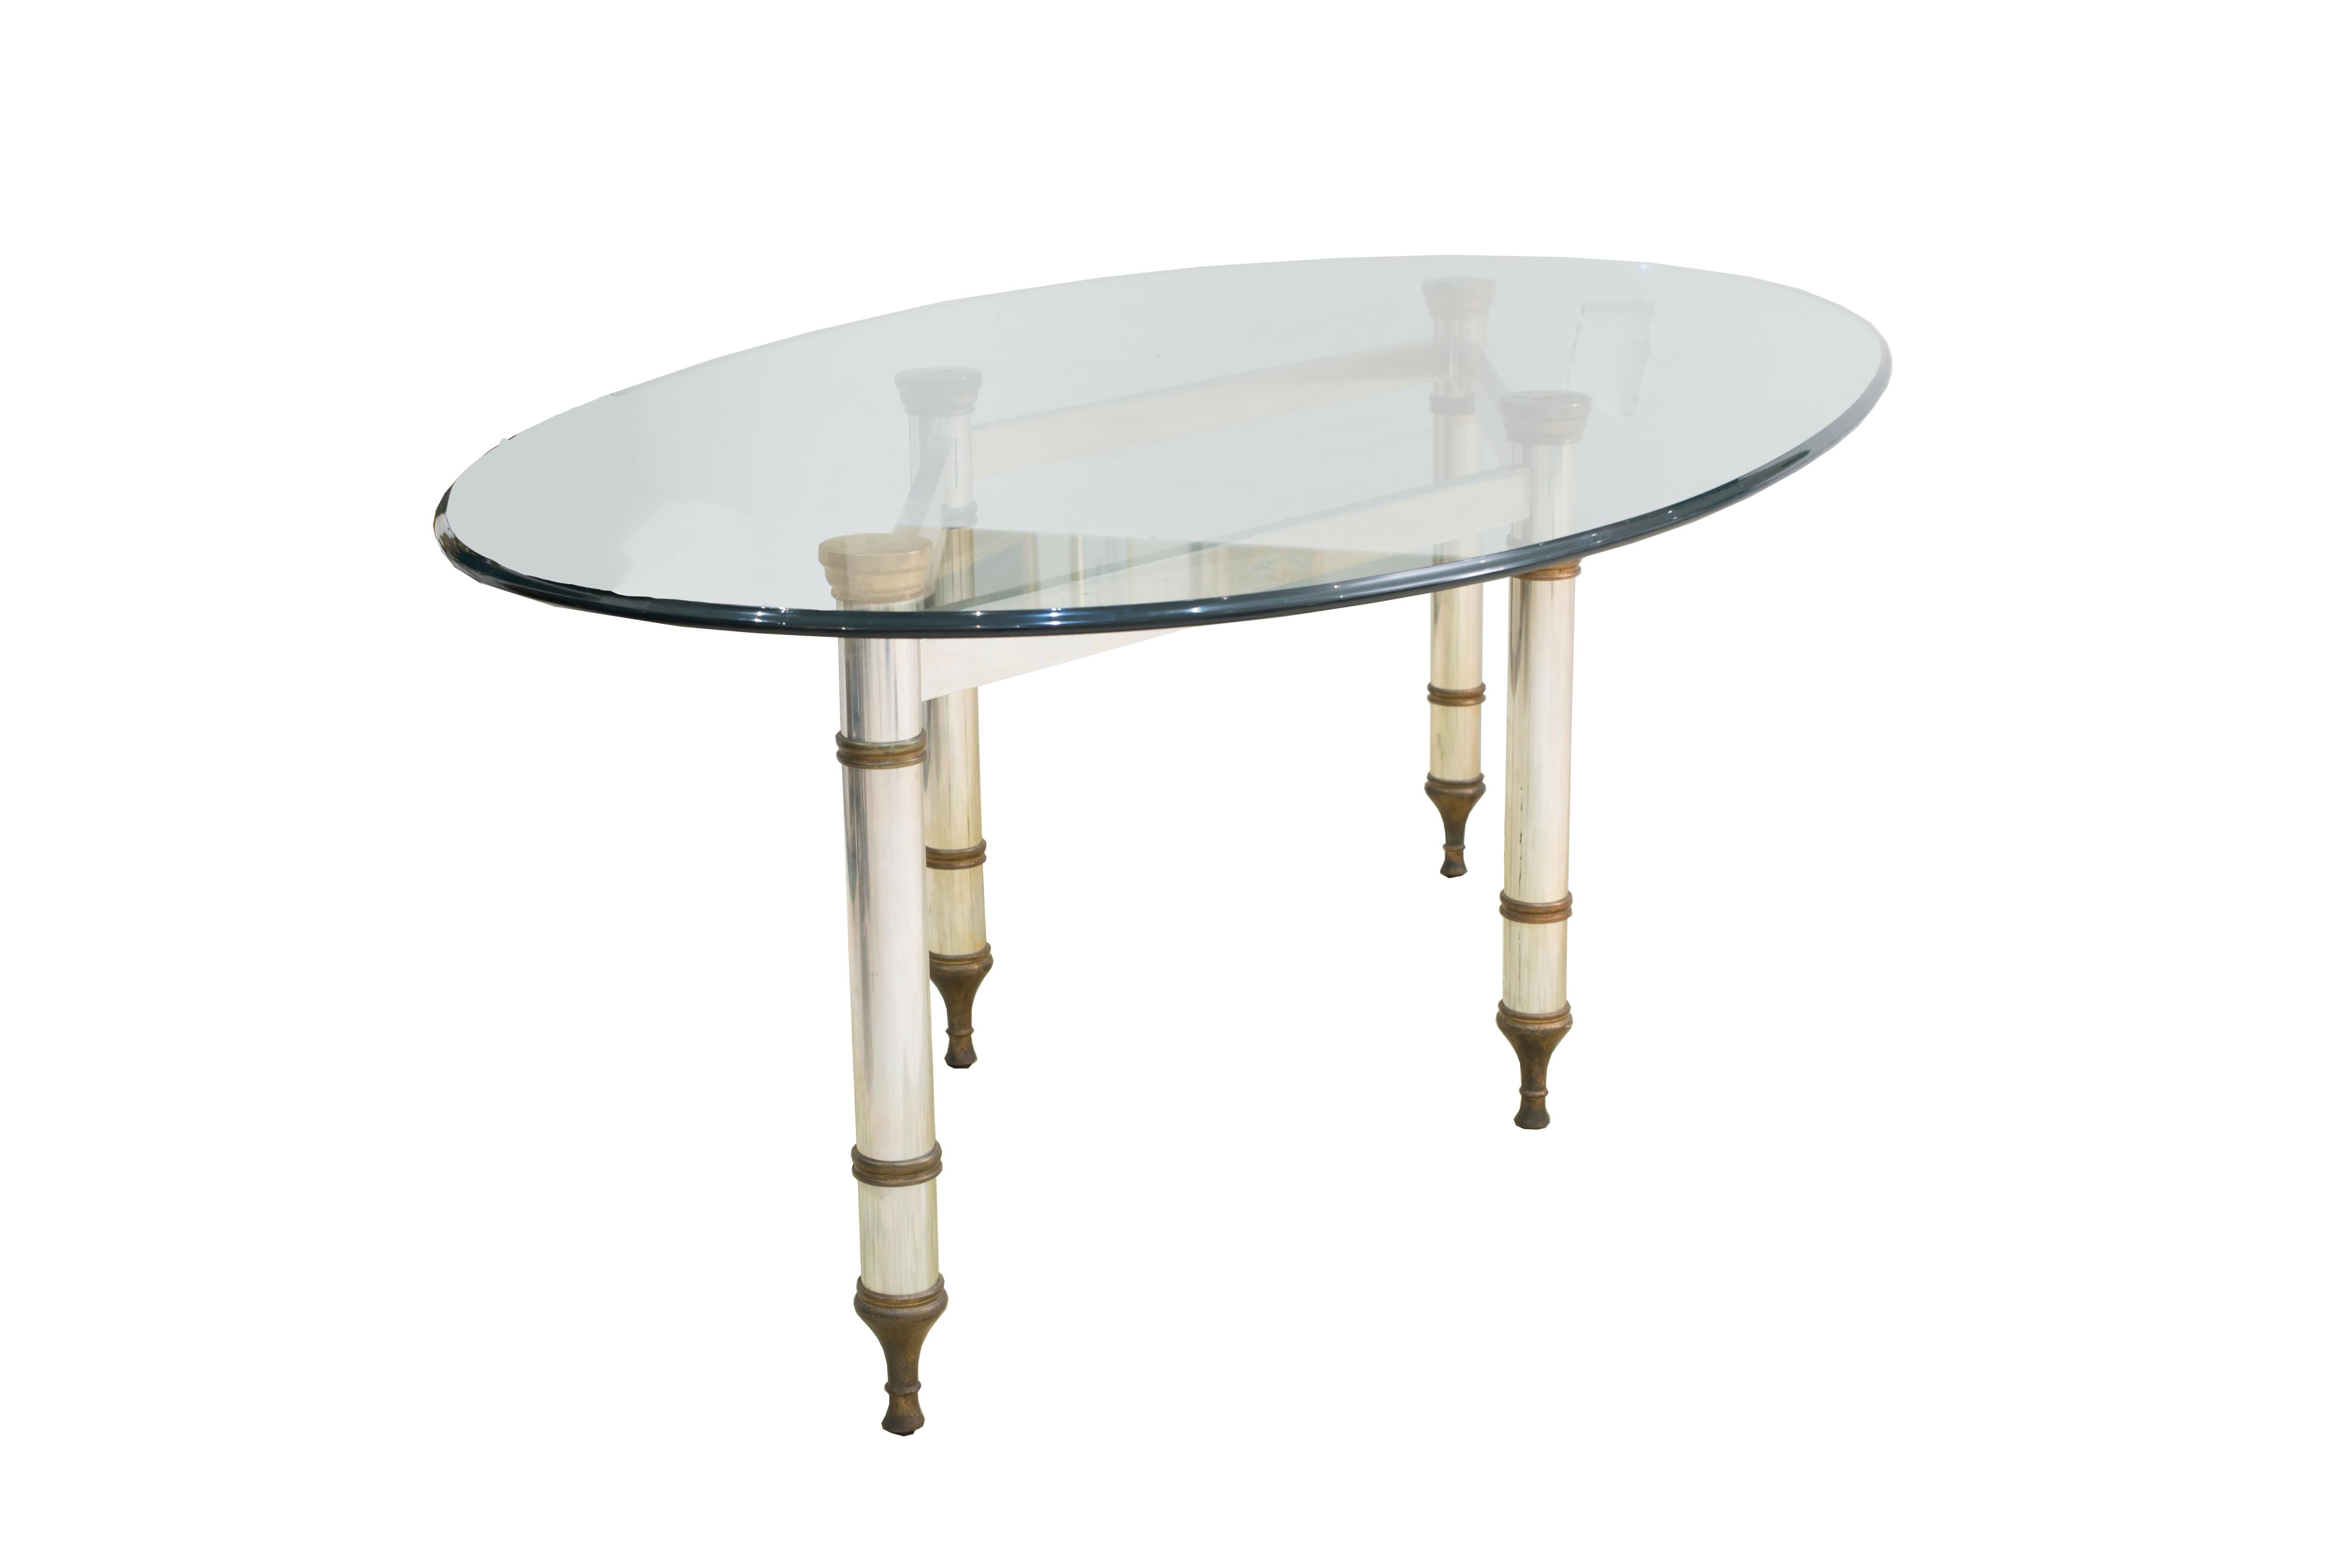 French midcentury oval dining table with a two-tone diamond form chrome and bronze base supporting an oval glass top. (style of Maison Jansen, circa 1970).